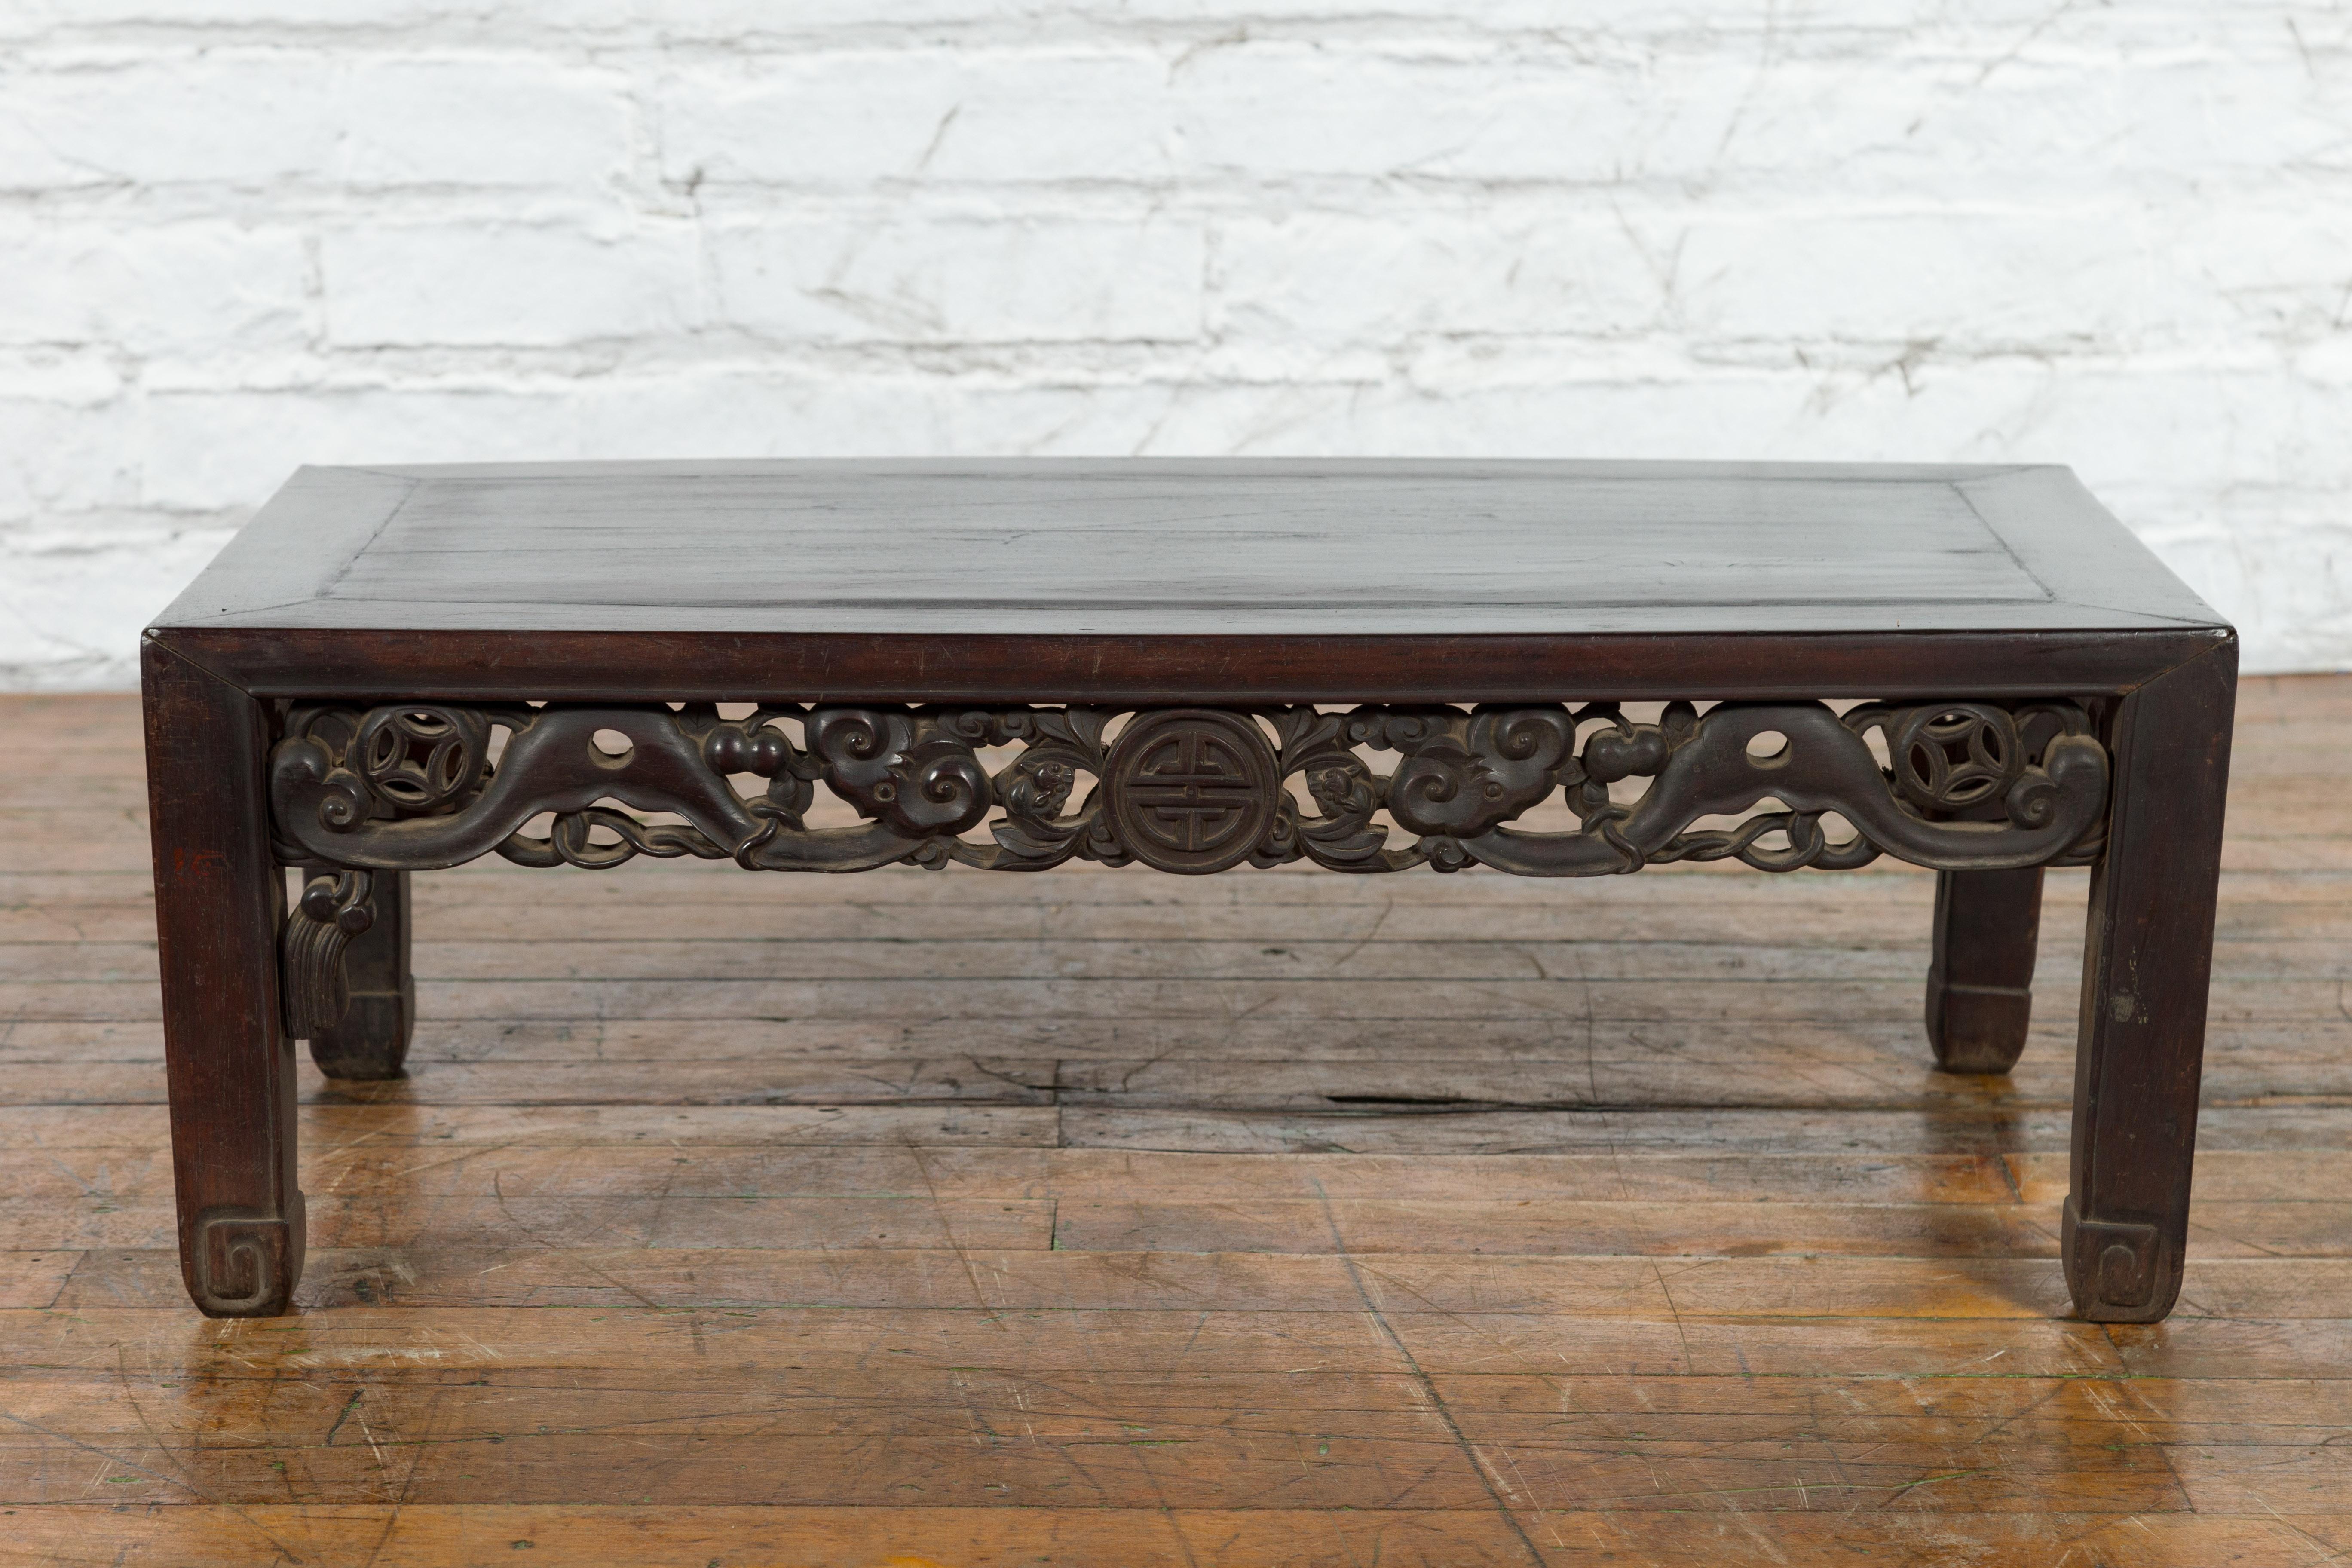 Chinese Qing Dynasty 19th Century Coffee Table with Carved Apron and Dark Patina In Good Condition For Sale In Yonkers, NY